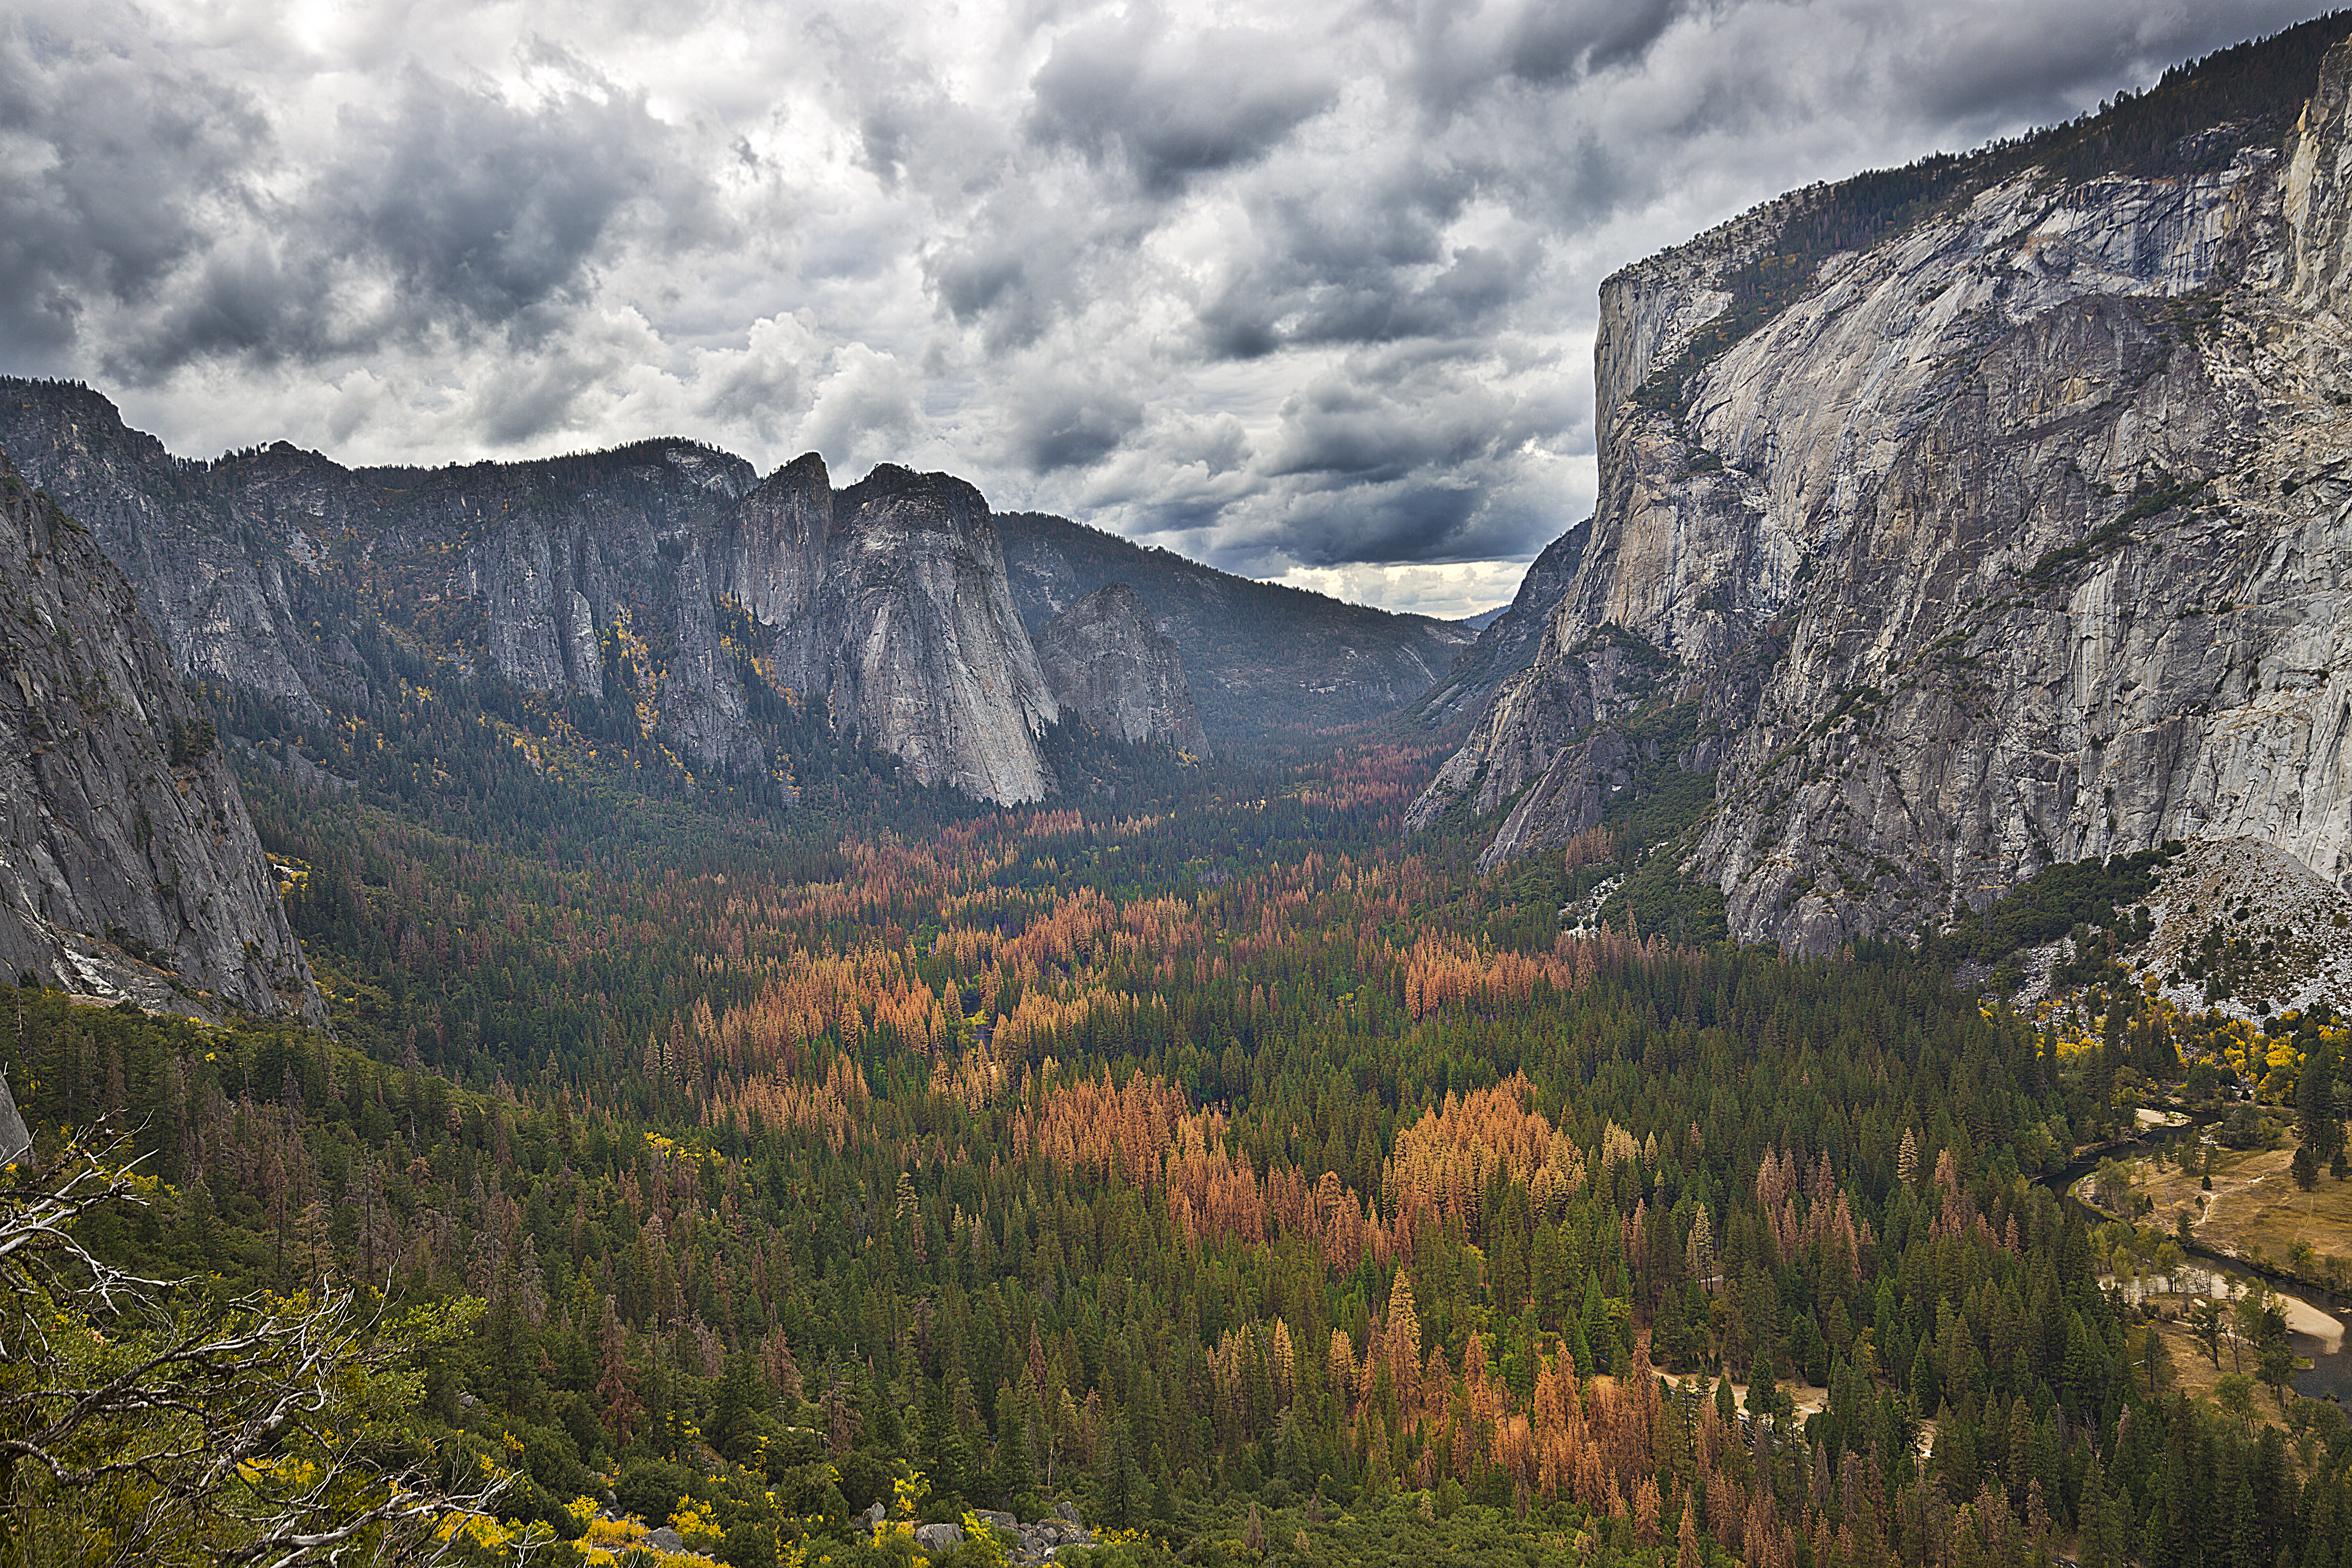 he Epic Yosemite Valley in Fall colors before the Storm rolled in.   Taken from the “4-Mile Trail”